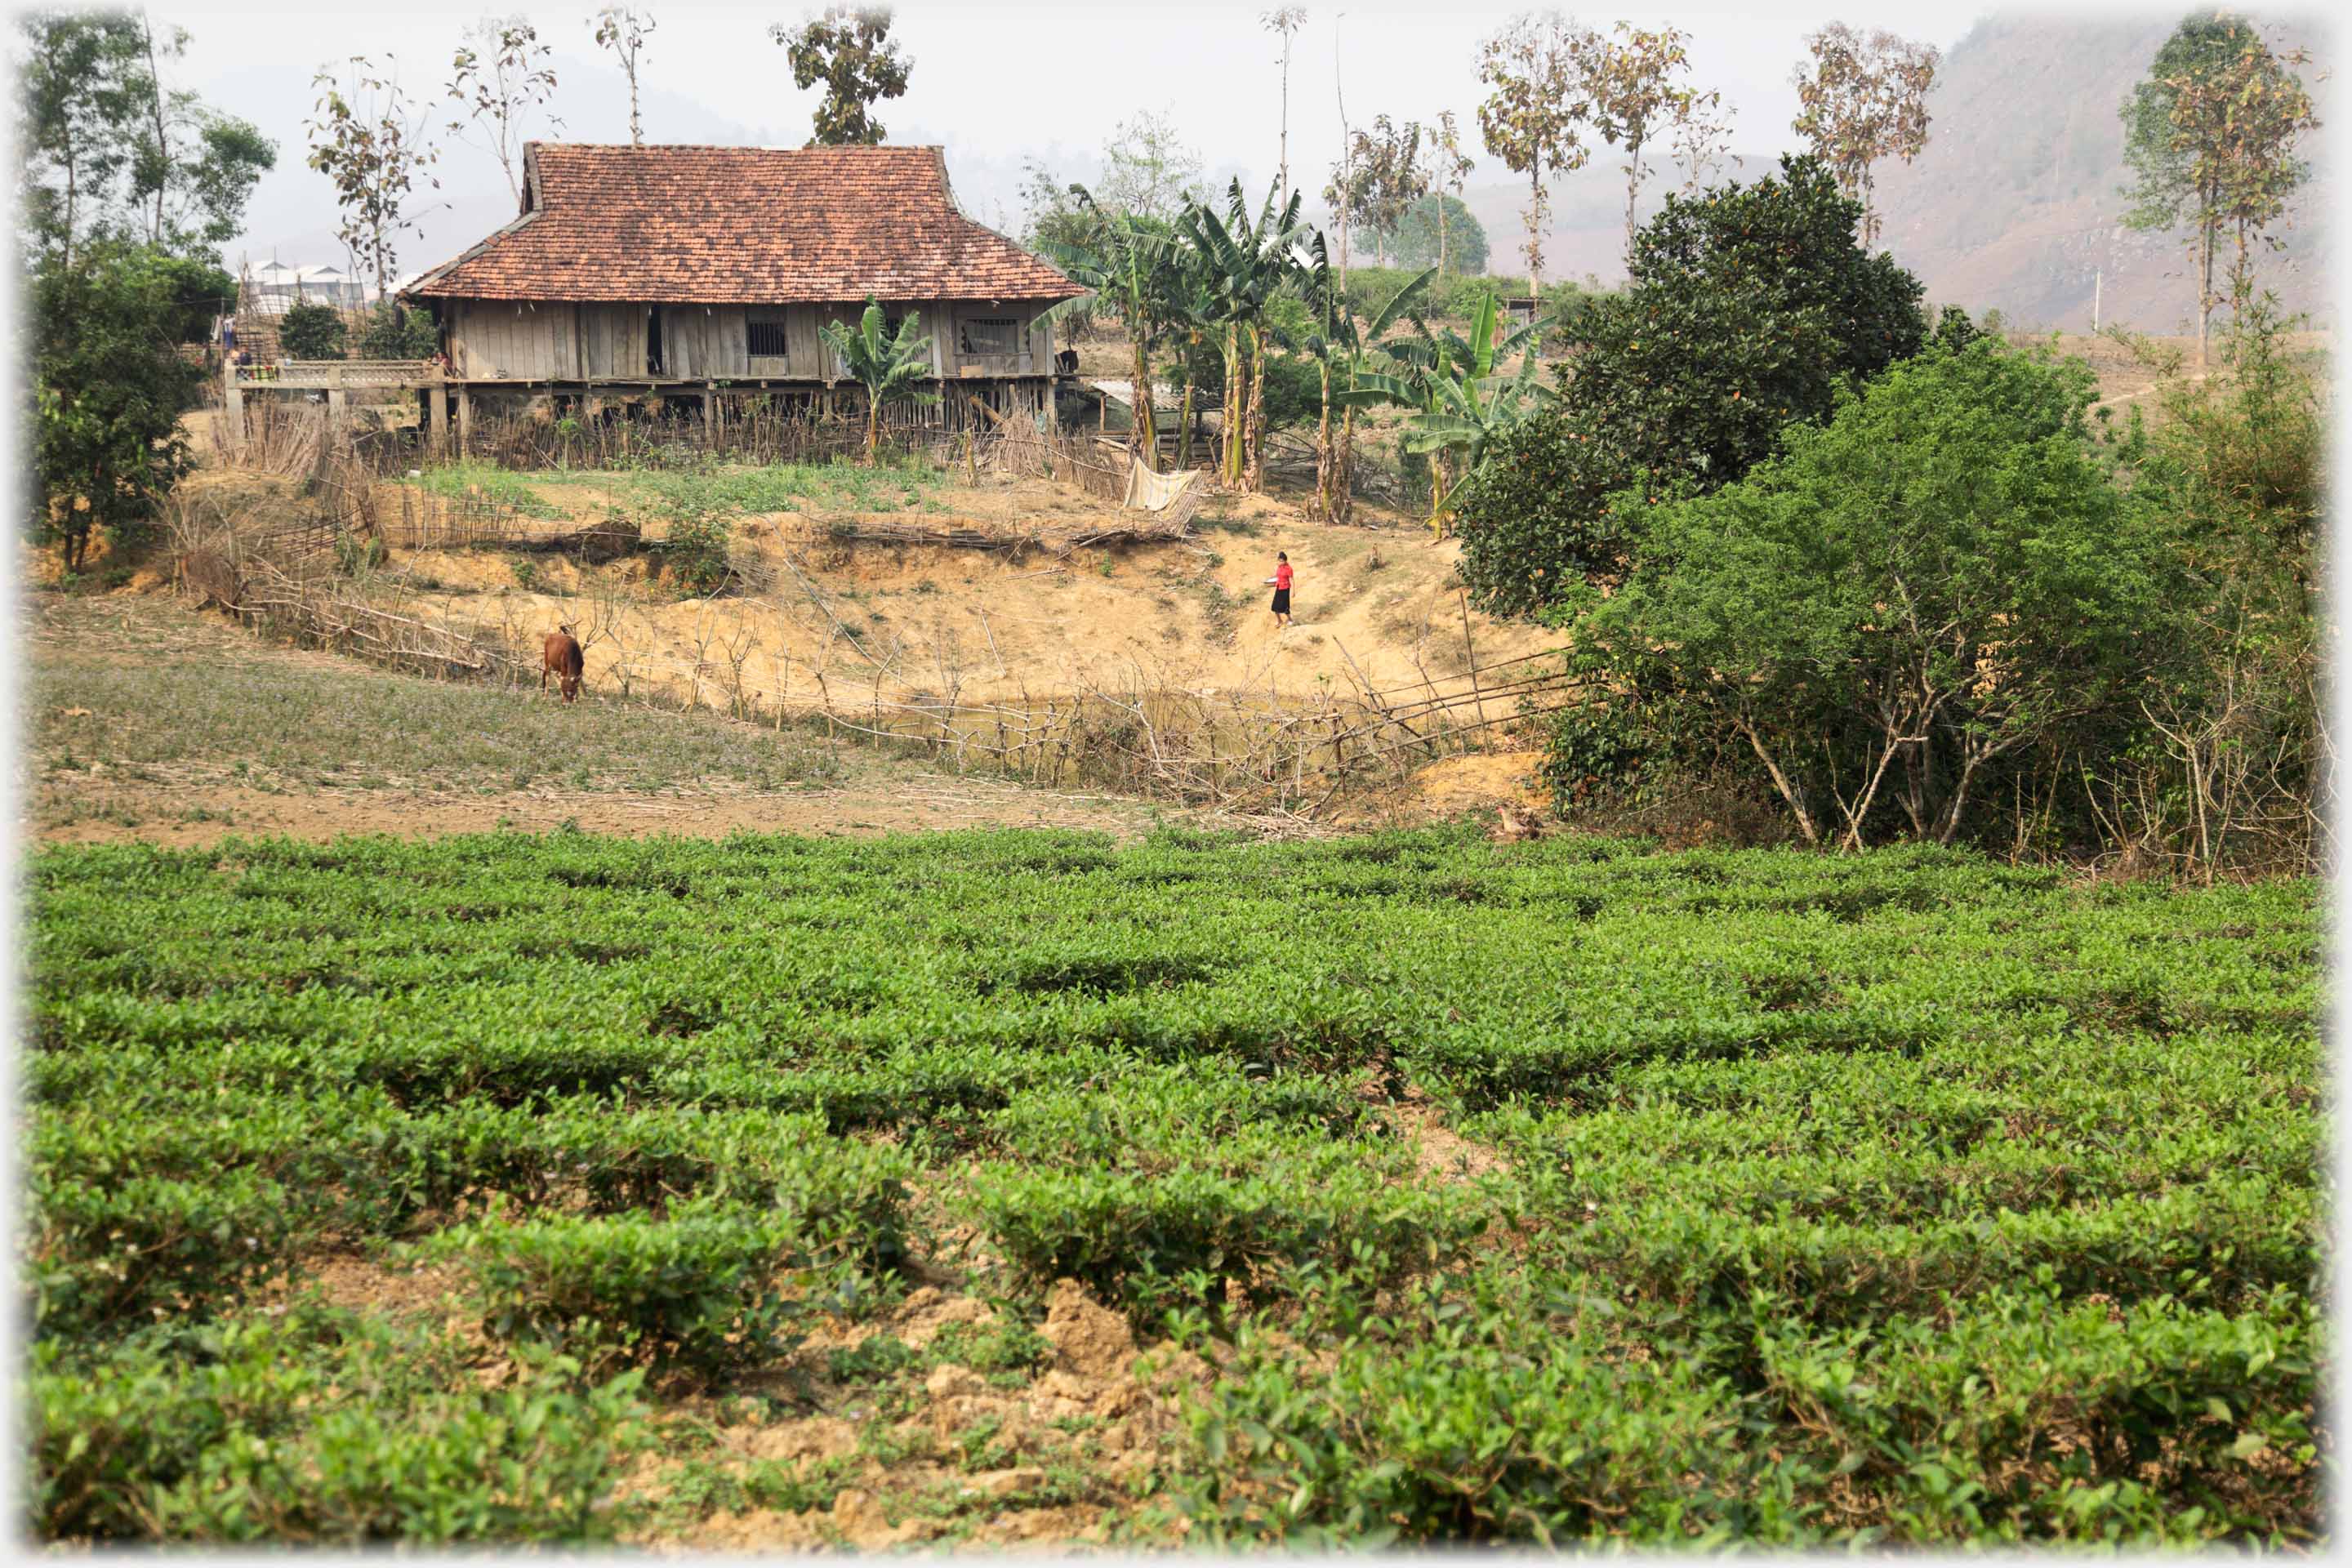 Substantial house with vegetables, bananas and fields of tea in foreground.